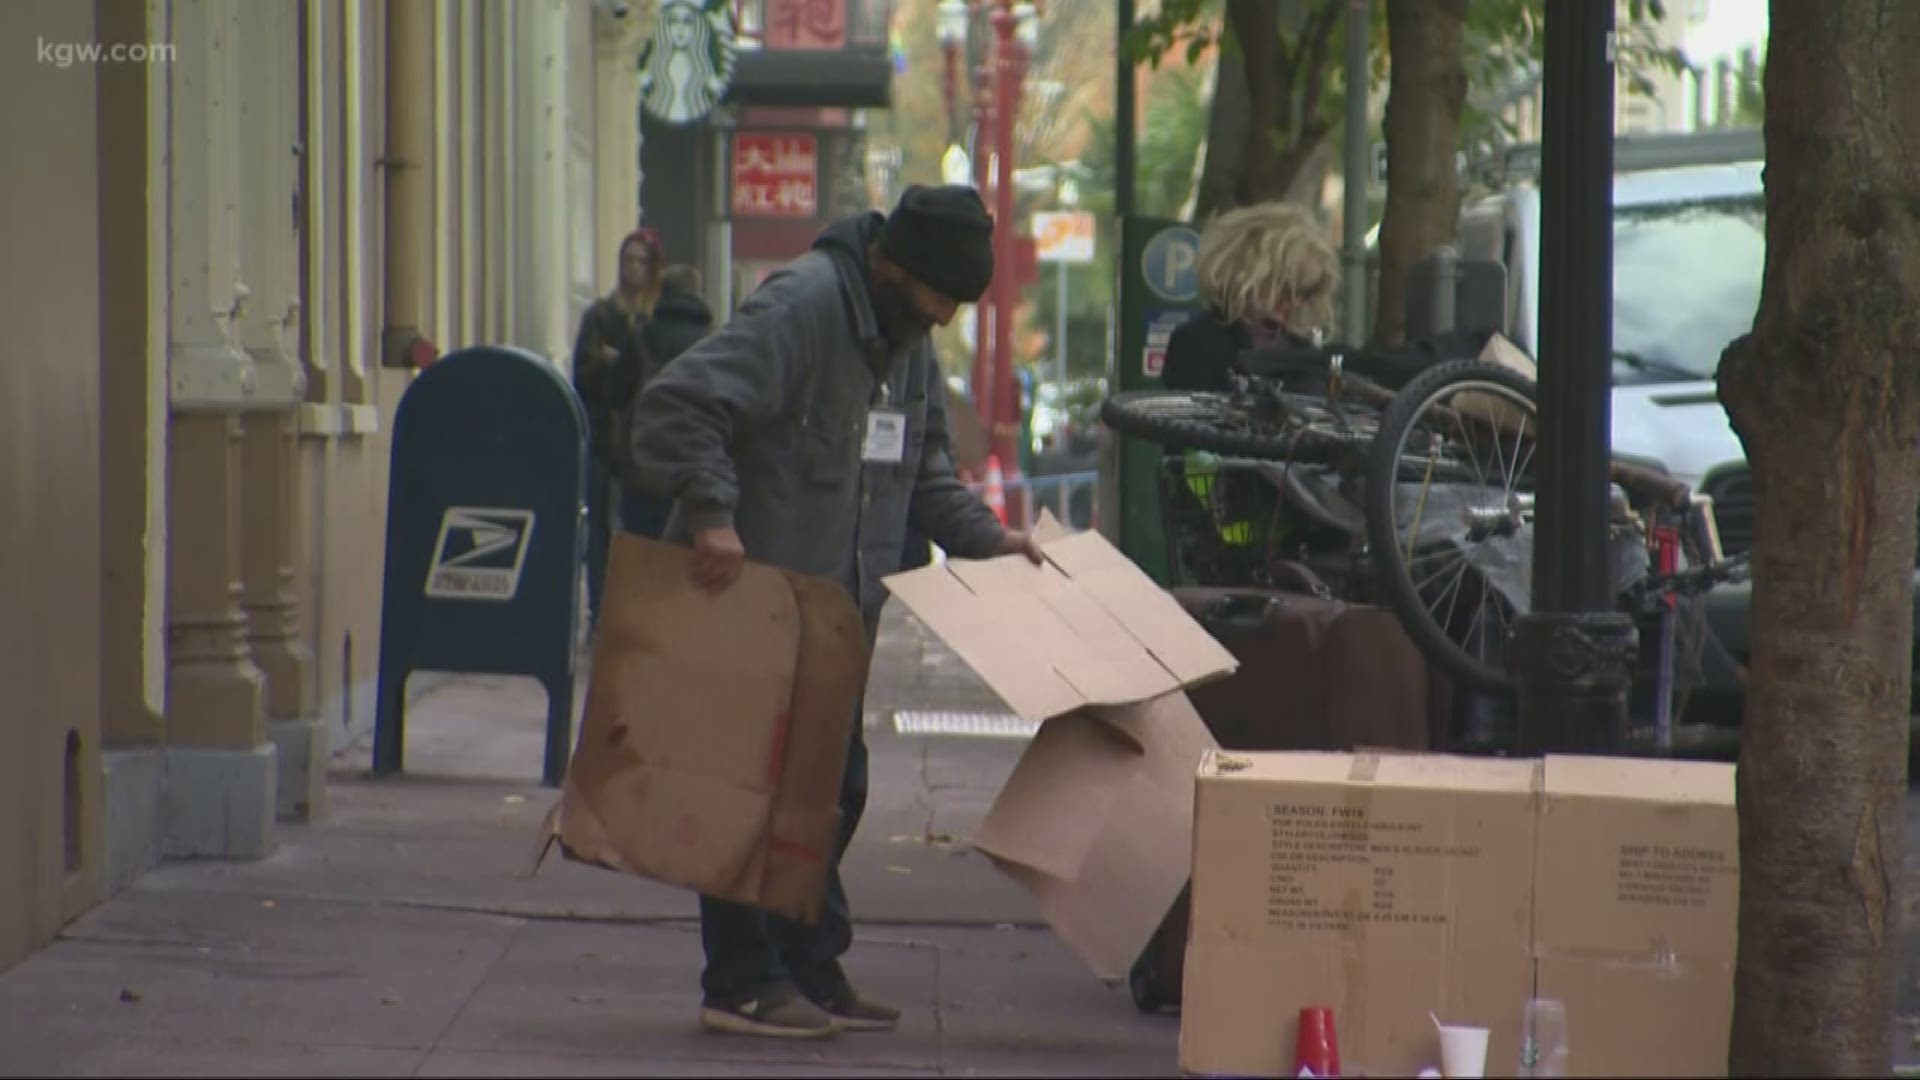 Multnomah County says there were 79 homeless deaths in 2017.